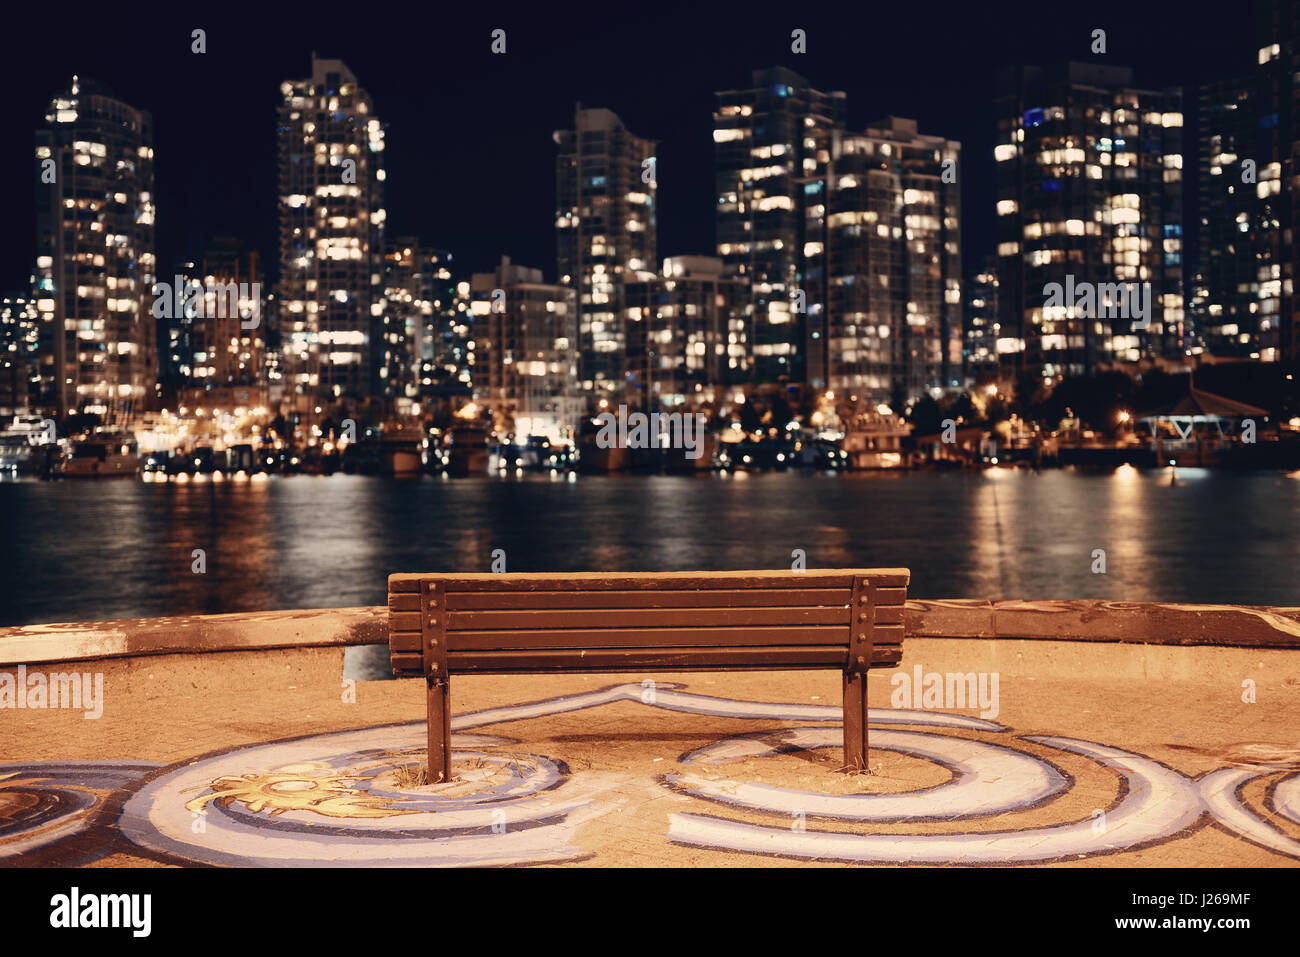 Vancouver city night with bench at waterfront with buildings. Stock Photo